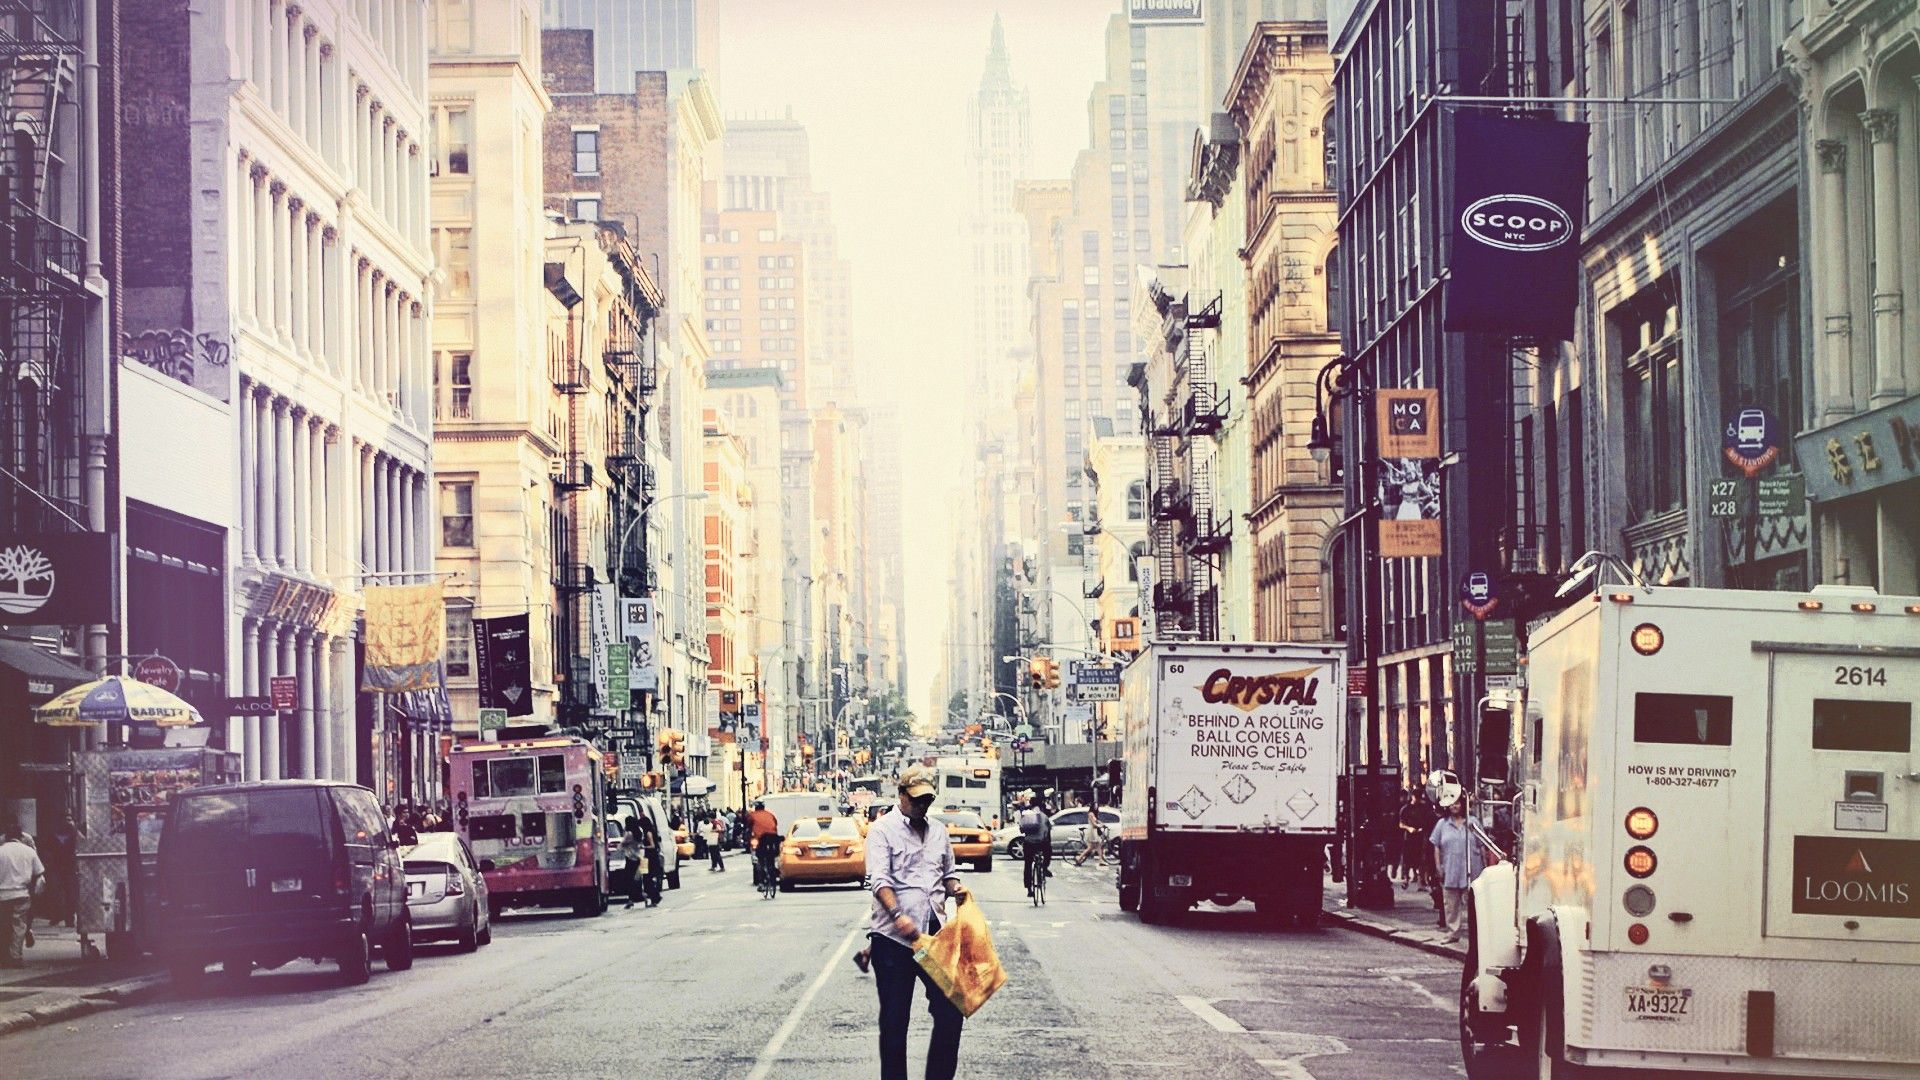 streets, vintage, buildings, New York City, towns, roads, cities wallpaper